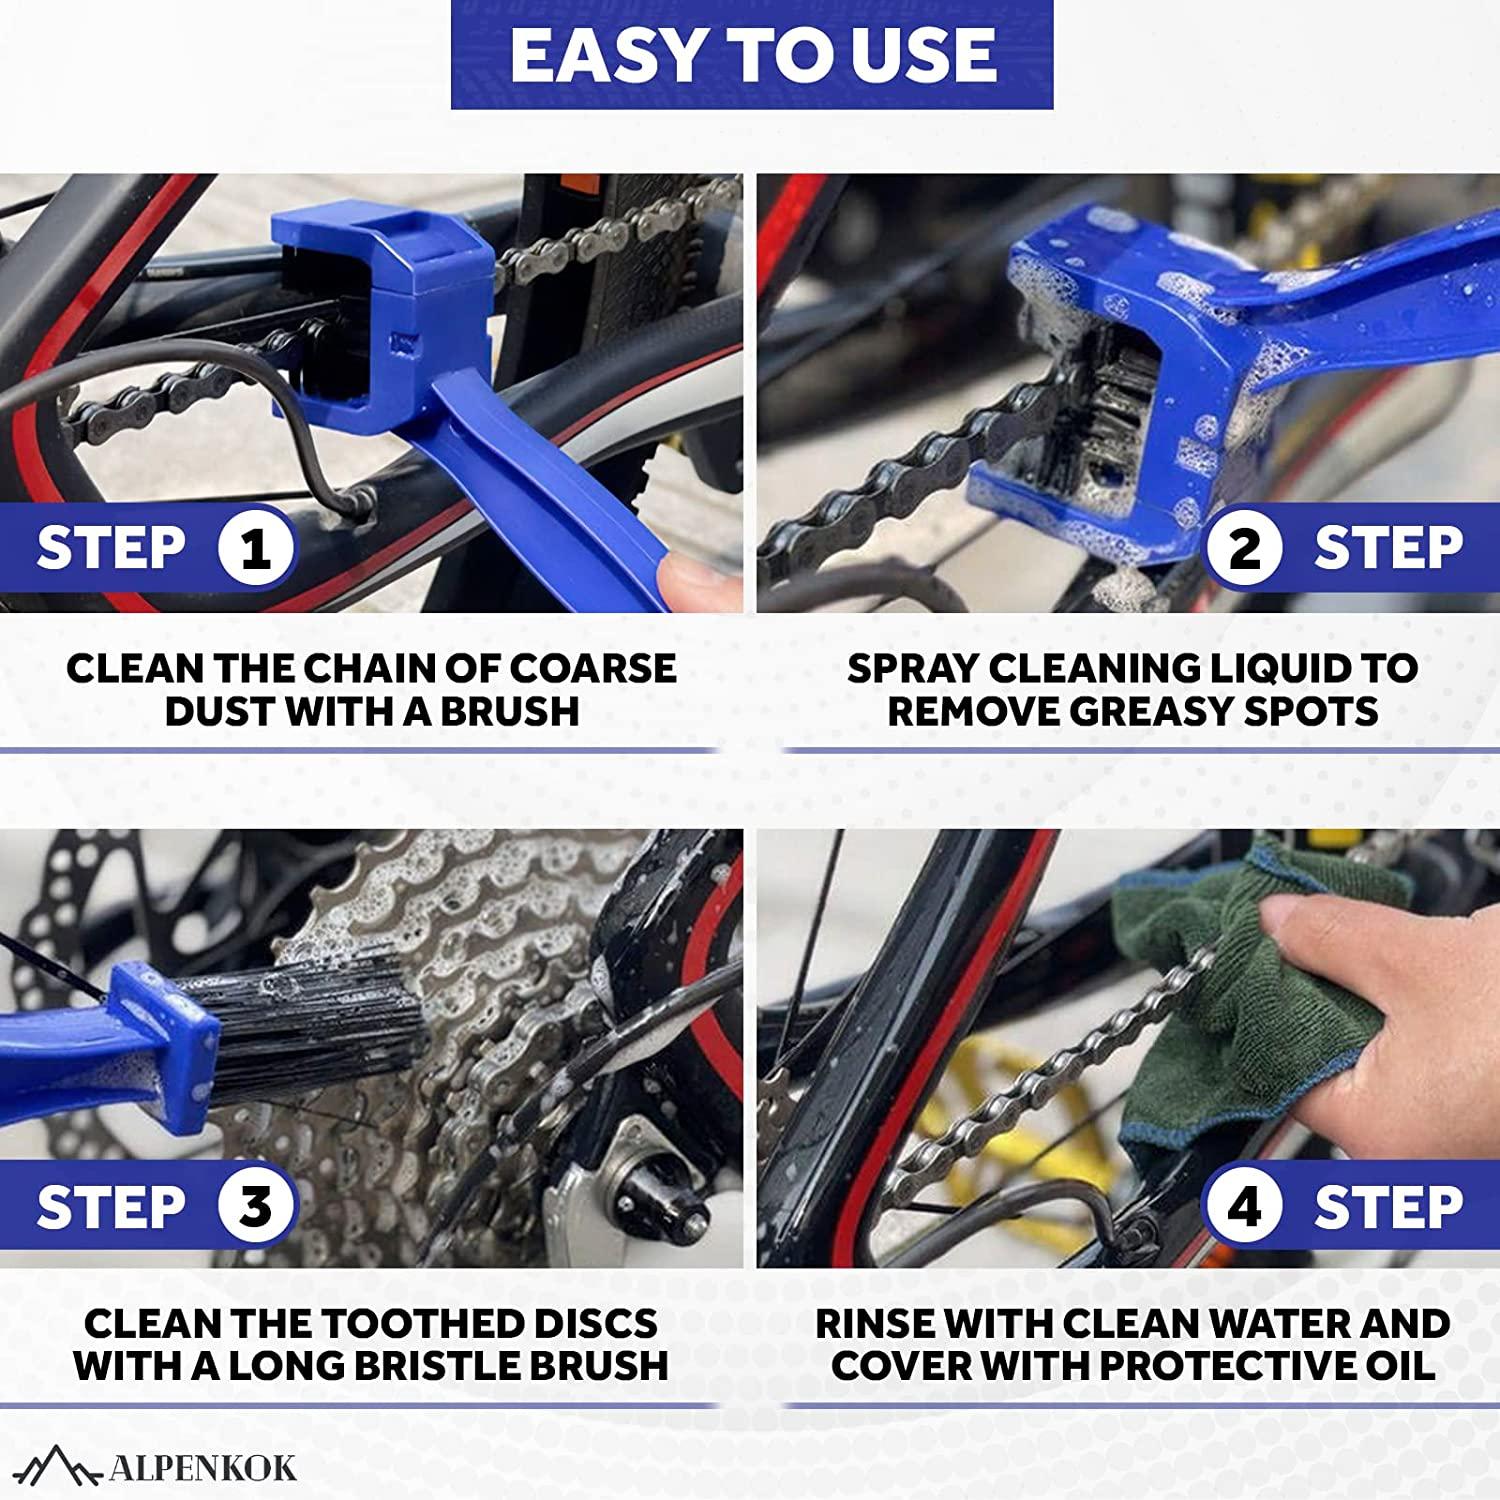  Bike Chain Cleaner Motorcycle Accessories - 2Pcs Bike Chain  Degreaser for Bicycle Tool Kit Motorcycle Chain Brush Cleaning Tool Bike  Accessories - Motorcycle Chain Cleaning Brush Set Bike Cleaning Kit 